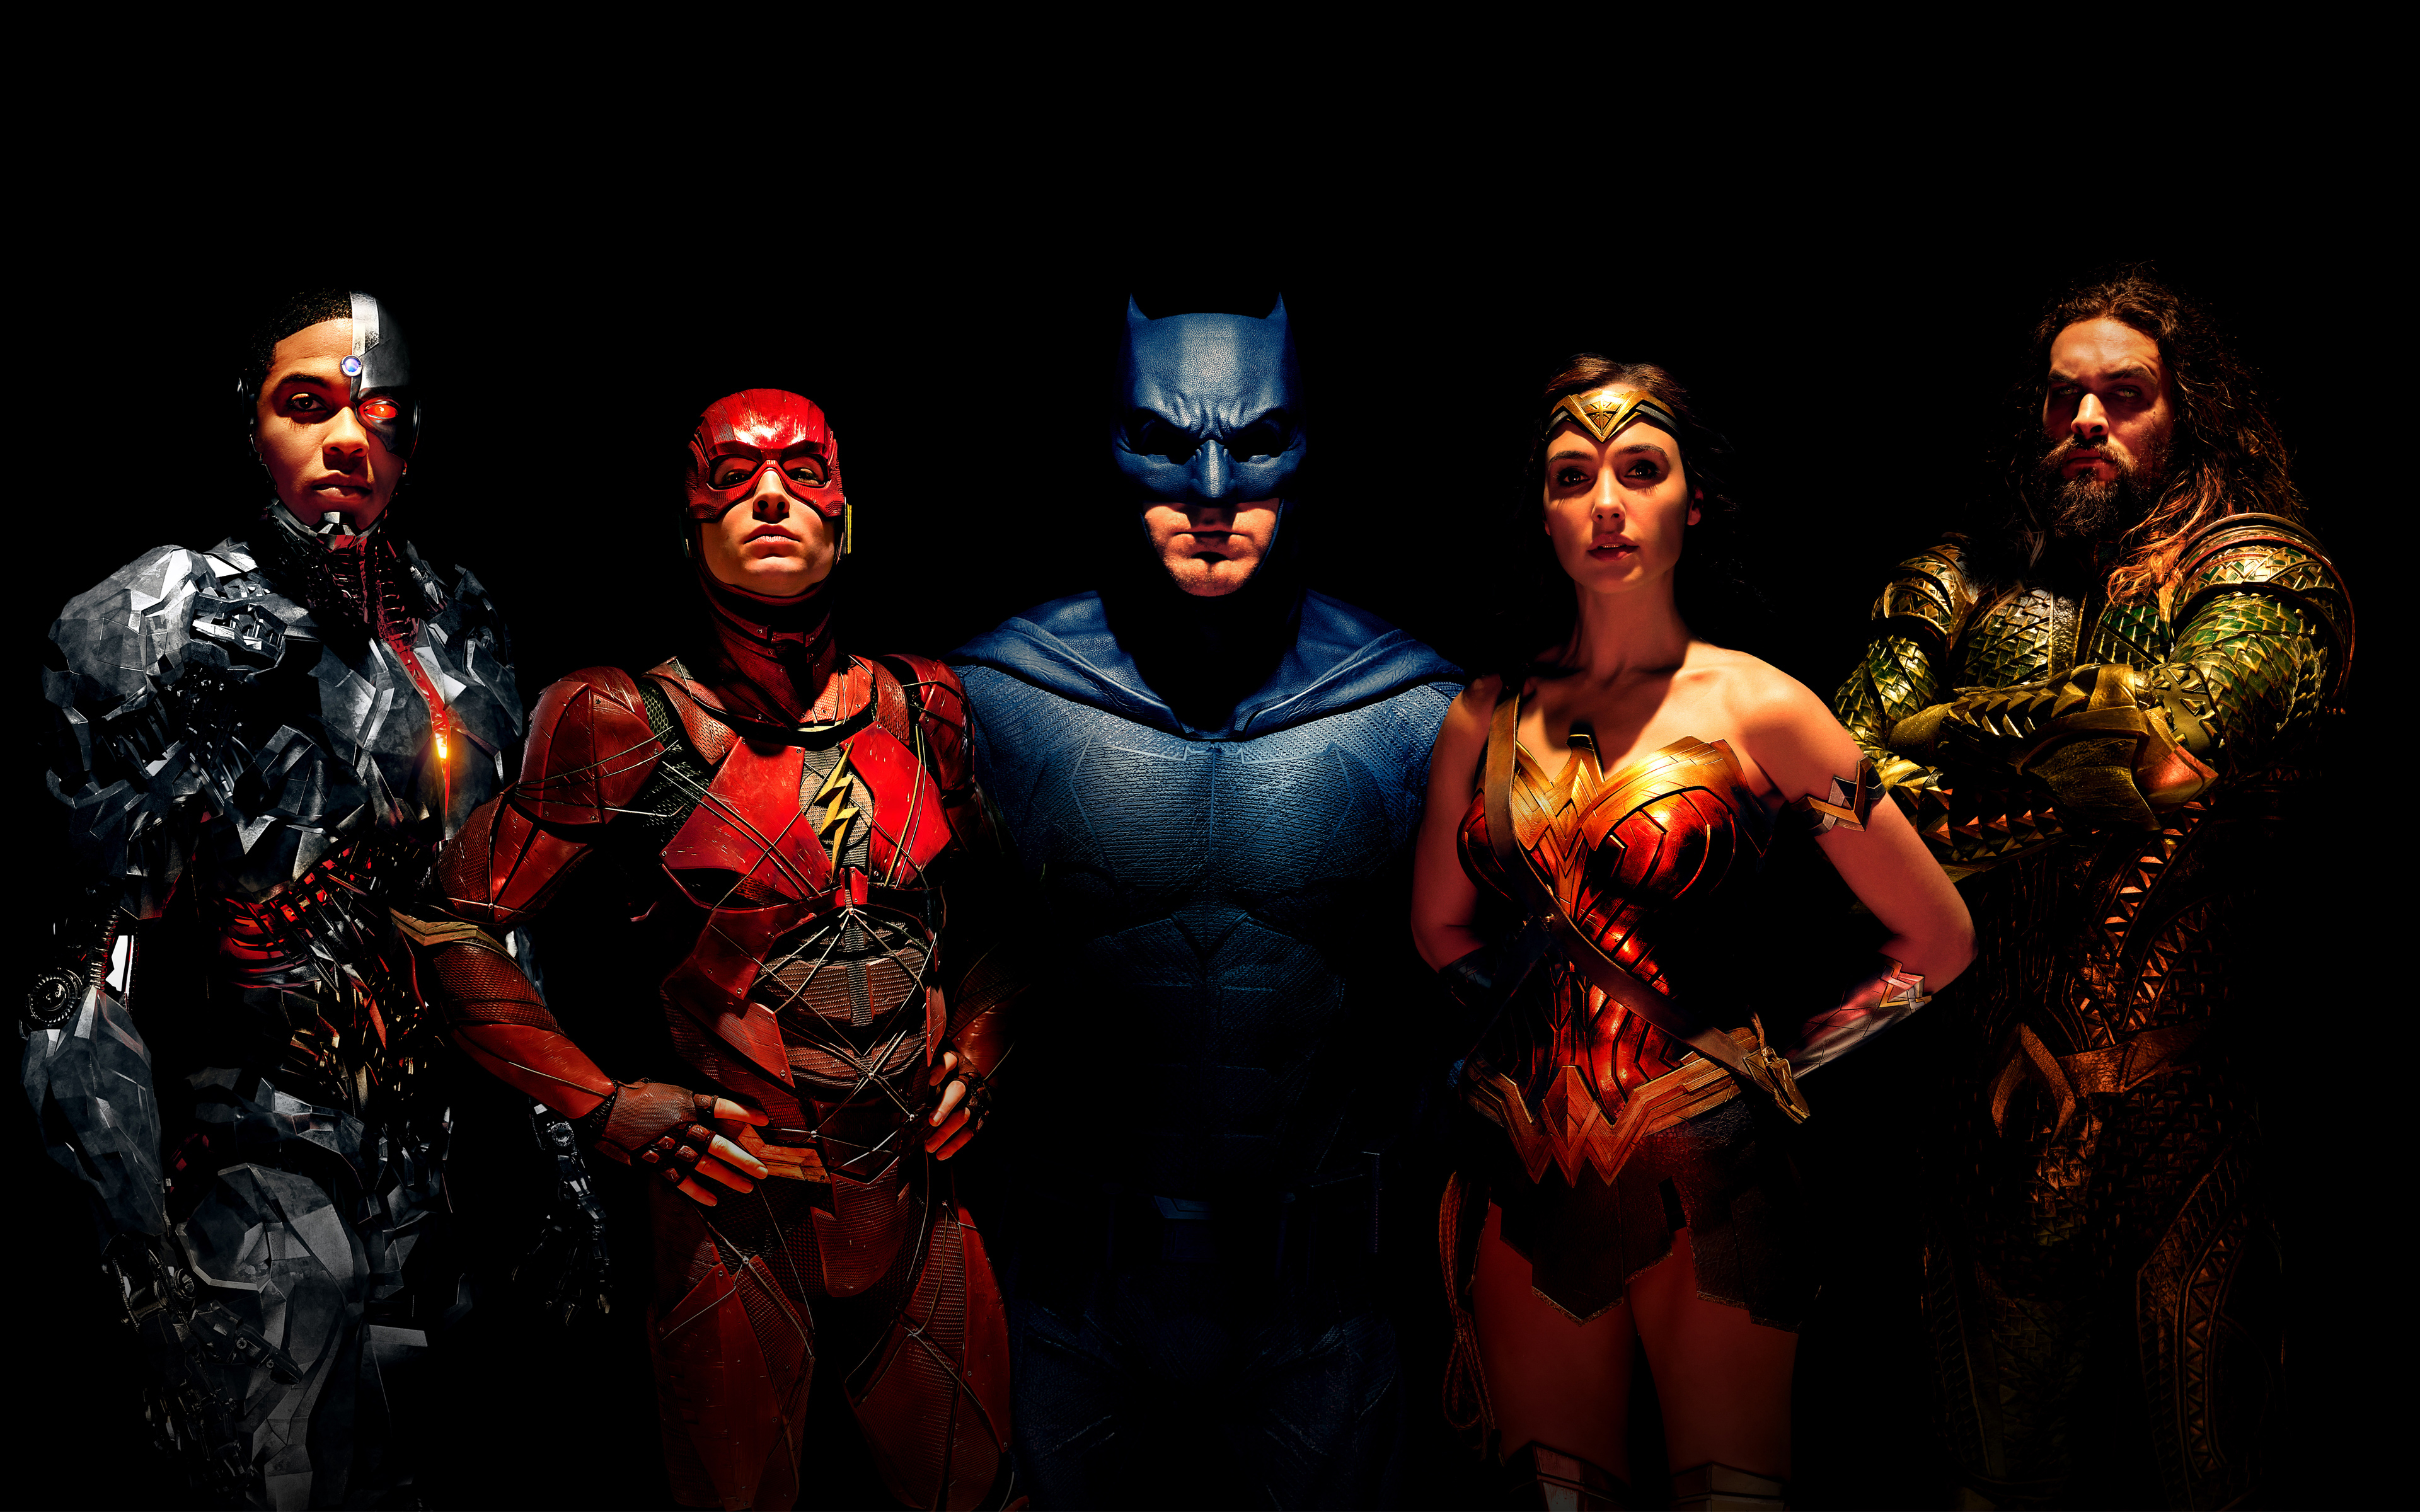 Justice League 2017 Unite The League Wallpaper, HD Movies 4K Wallpapers